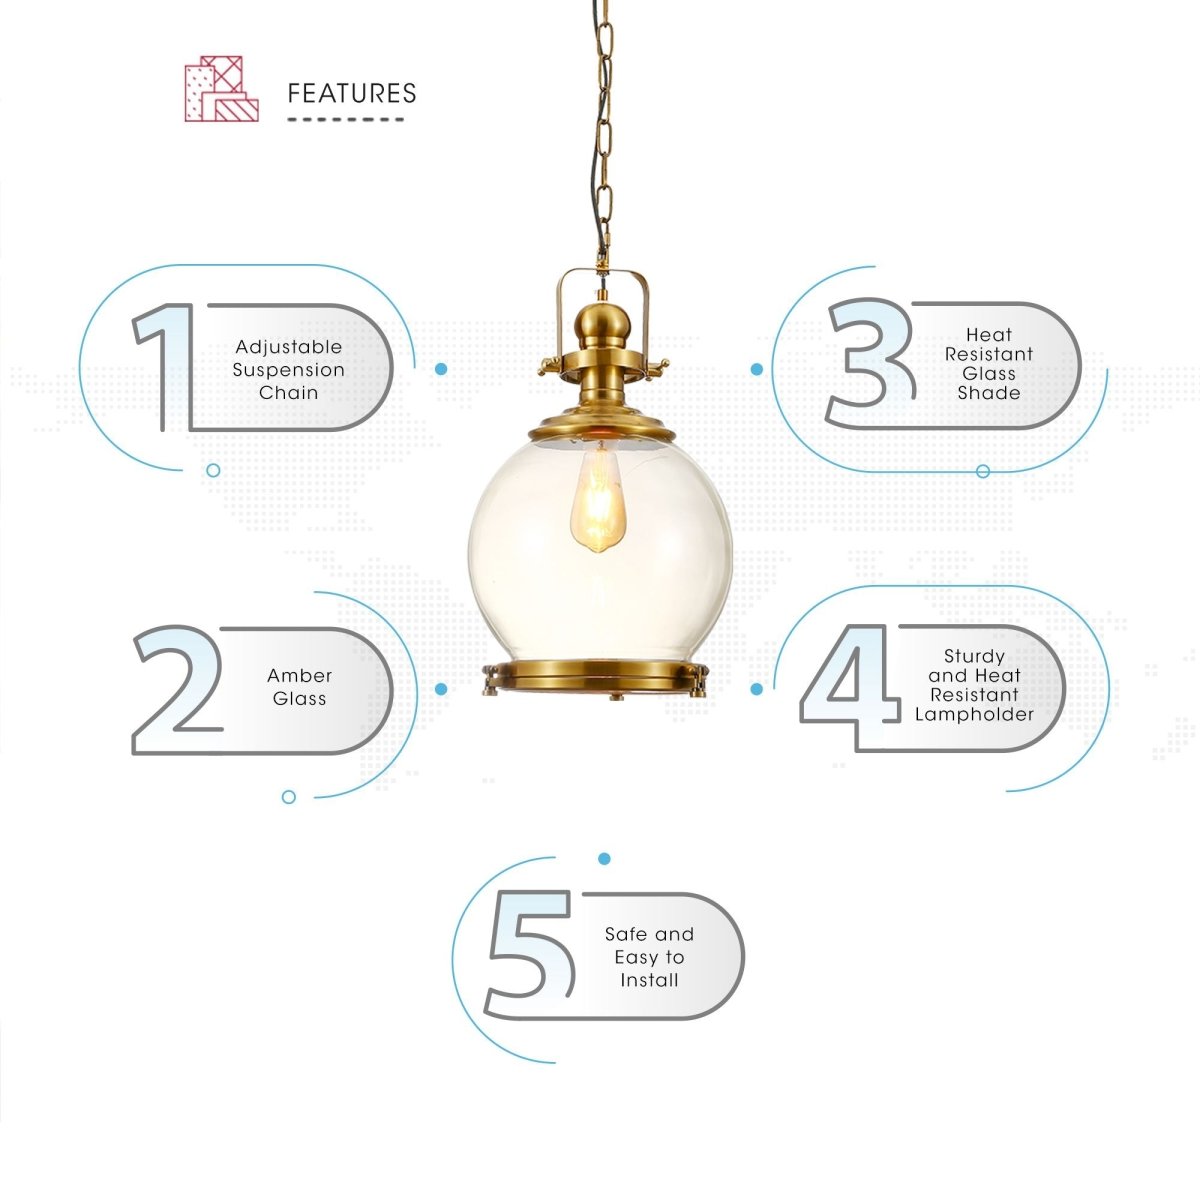 Features of golden bronze metal amber glass globe pendant light sealed with e27 fitting